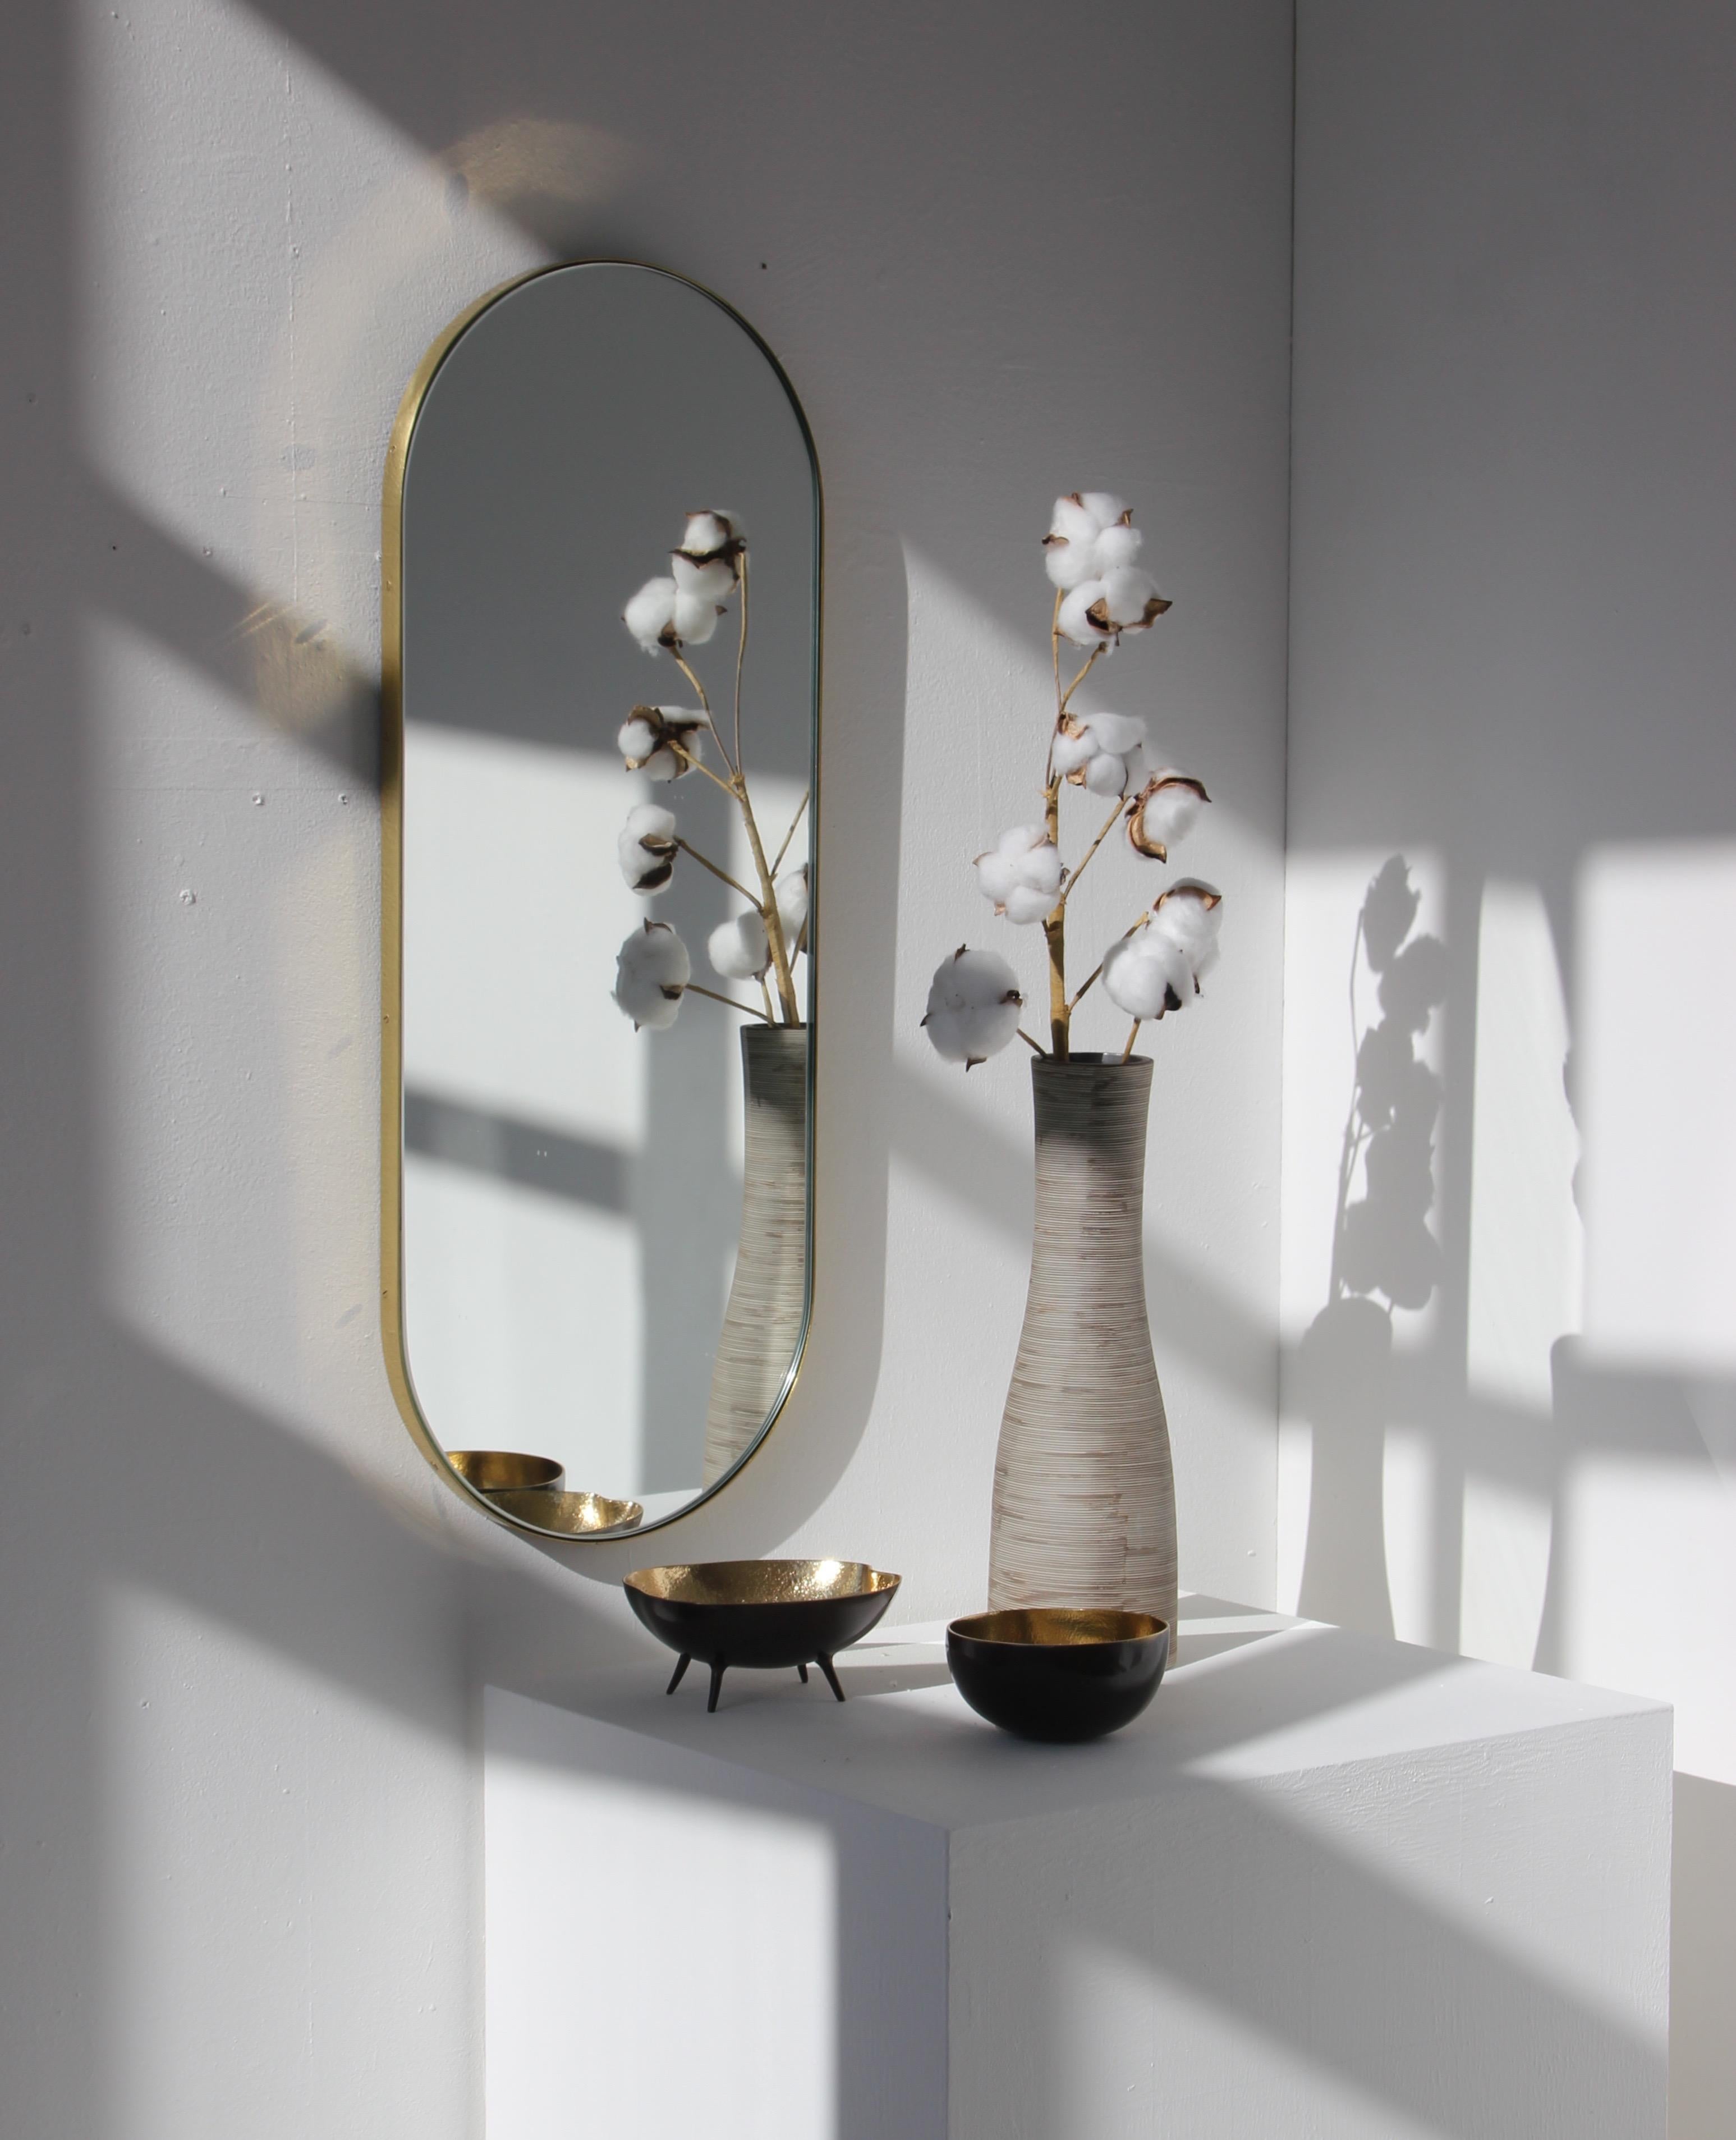 Delightful capsule shaped mirror with an elegant brushed brass frame. Designed and handcrafted in London, UK.

Medium, large and extra-large (37cm x 56cm, 46cm x 71cm and 48cm x 97cm) mirrors are fitted with an ingenious French cleat (split batten)